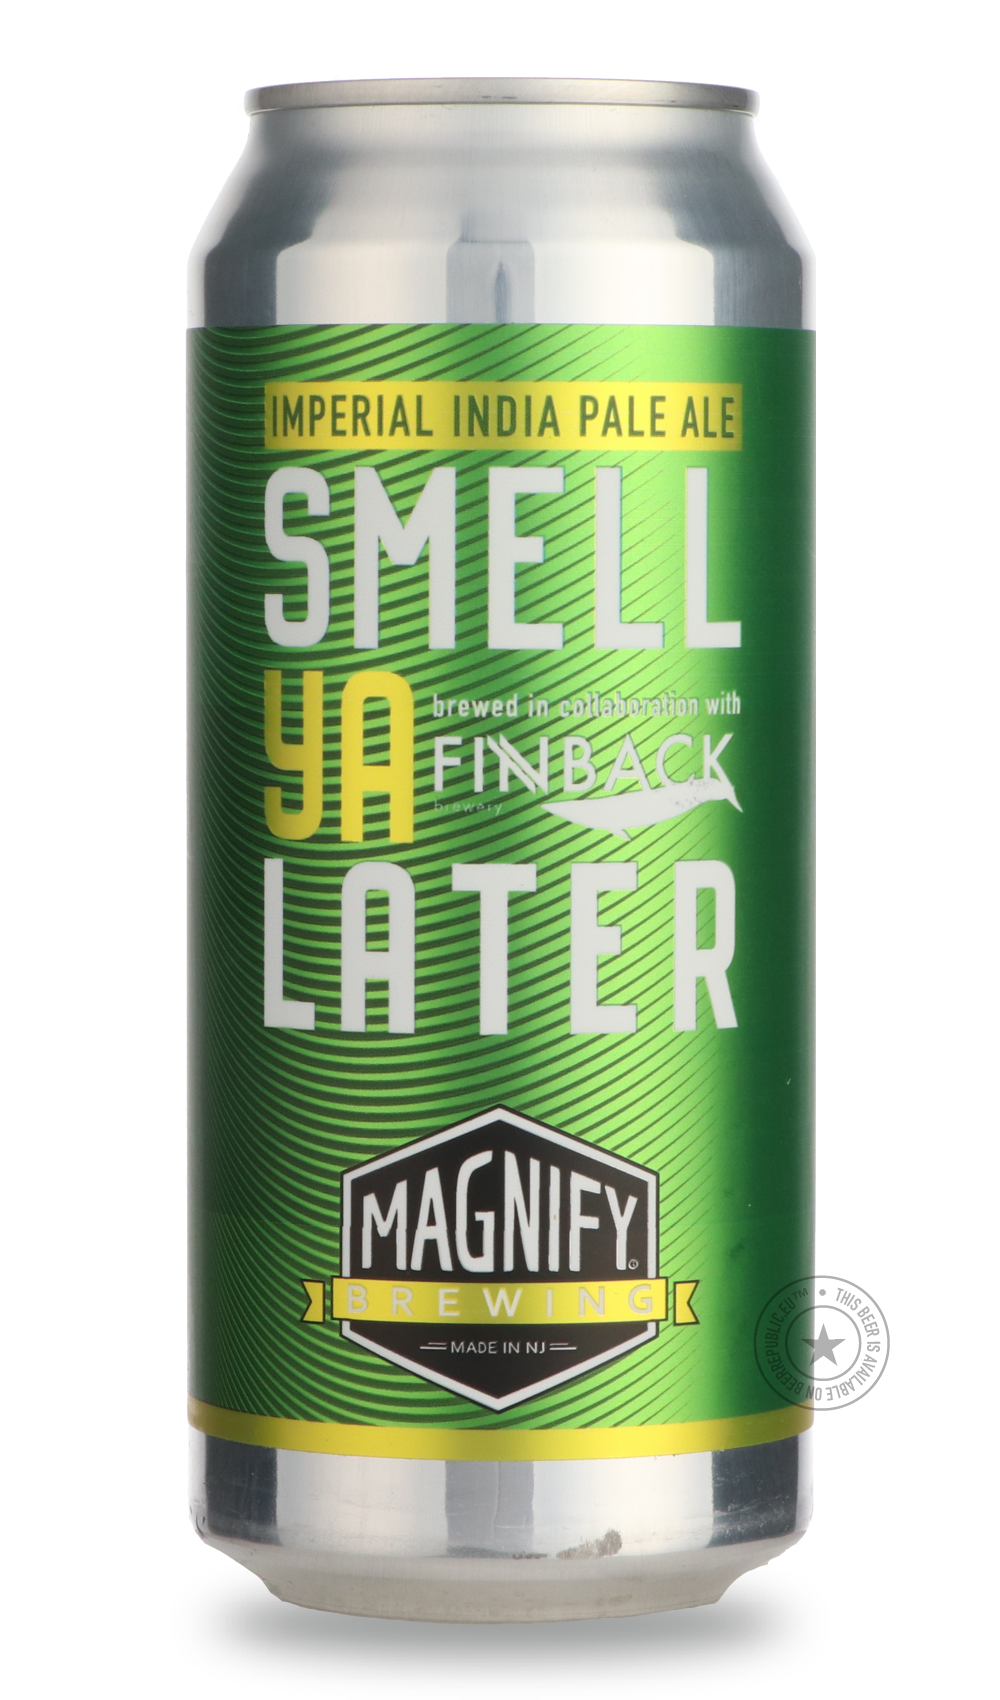 -Magnify- Smell Ya Later / Finback-IPA- Only @ Beer Republic - The best online beer store for American & Canadian craft beer - Buy beer online from the USA and Canada - Bier online kopen - Amerikaans bier kopen - Craft beer store - Craft beer kopen - Amerikanisch bier kaufen - Bier online kaufen - Acheter biere online - IPA - Stout - Porter - New England IPA - Hazy IPA - Imperial Stout - Barrel Aged - Barrel Aged Imperial Stout - Brown - Dark beer - Blond - Blonde - Pilsner - Lager - Wheat - Weizen - Amber 